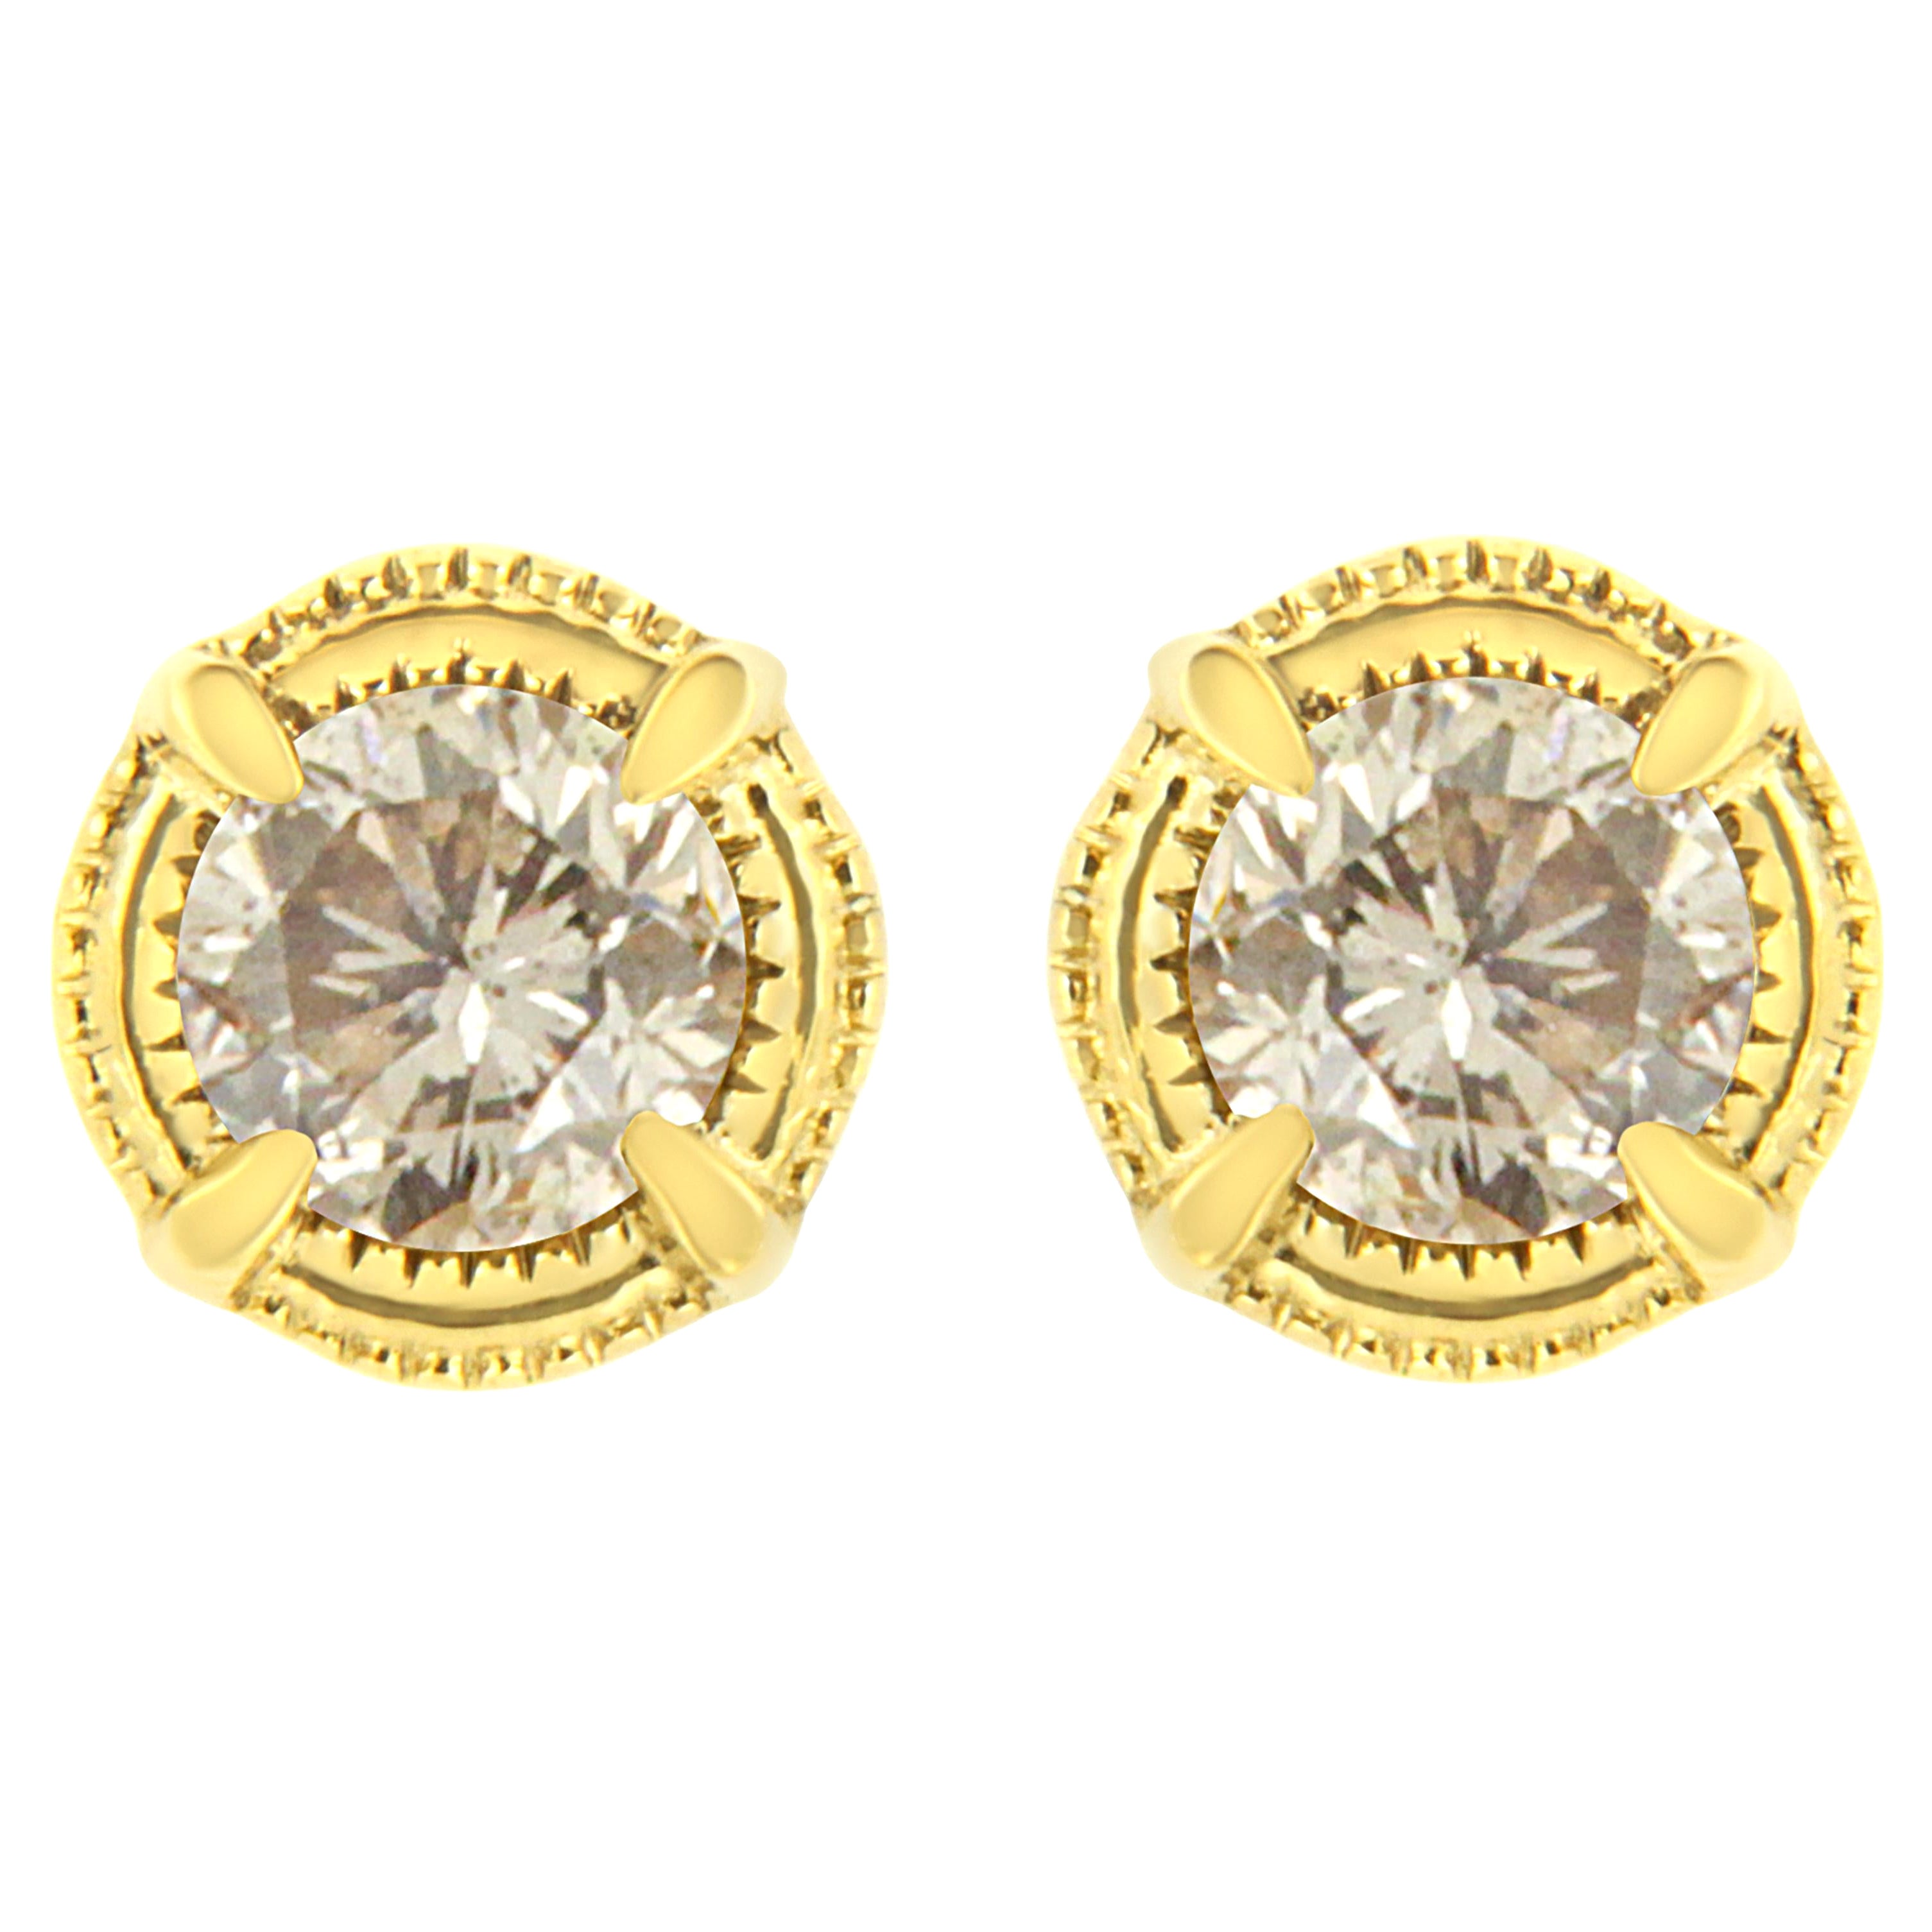 14K Yellow Gold Plated .925 Sterling Silver 1.0 Carat Diamond Stud Earring